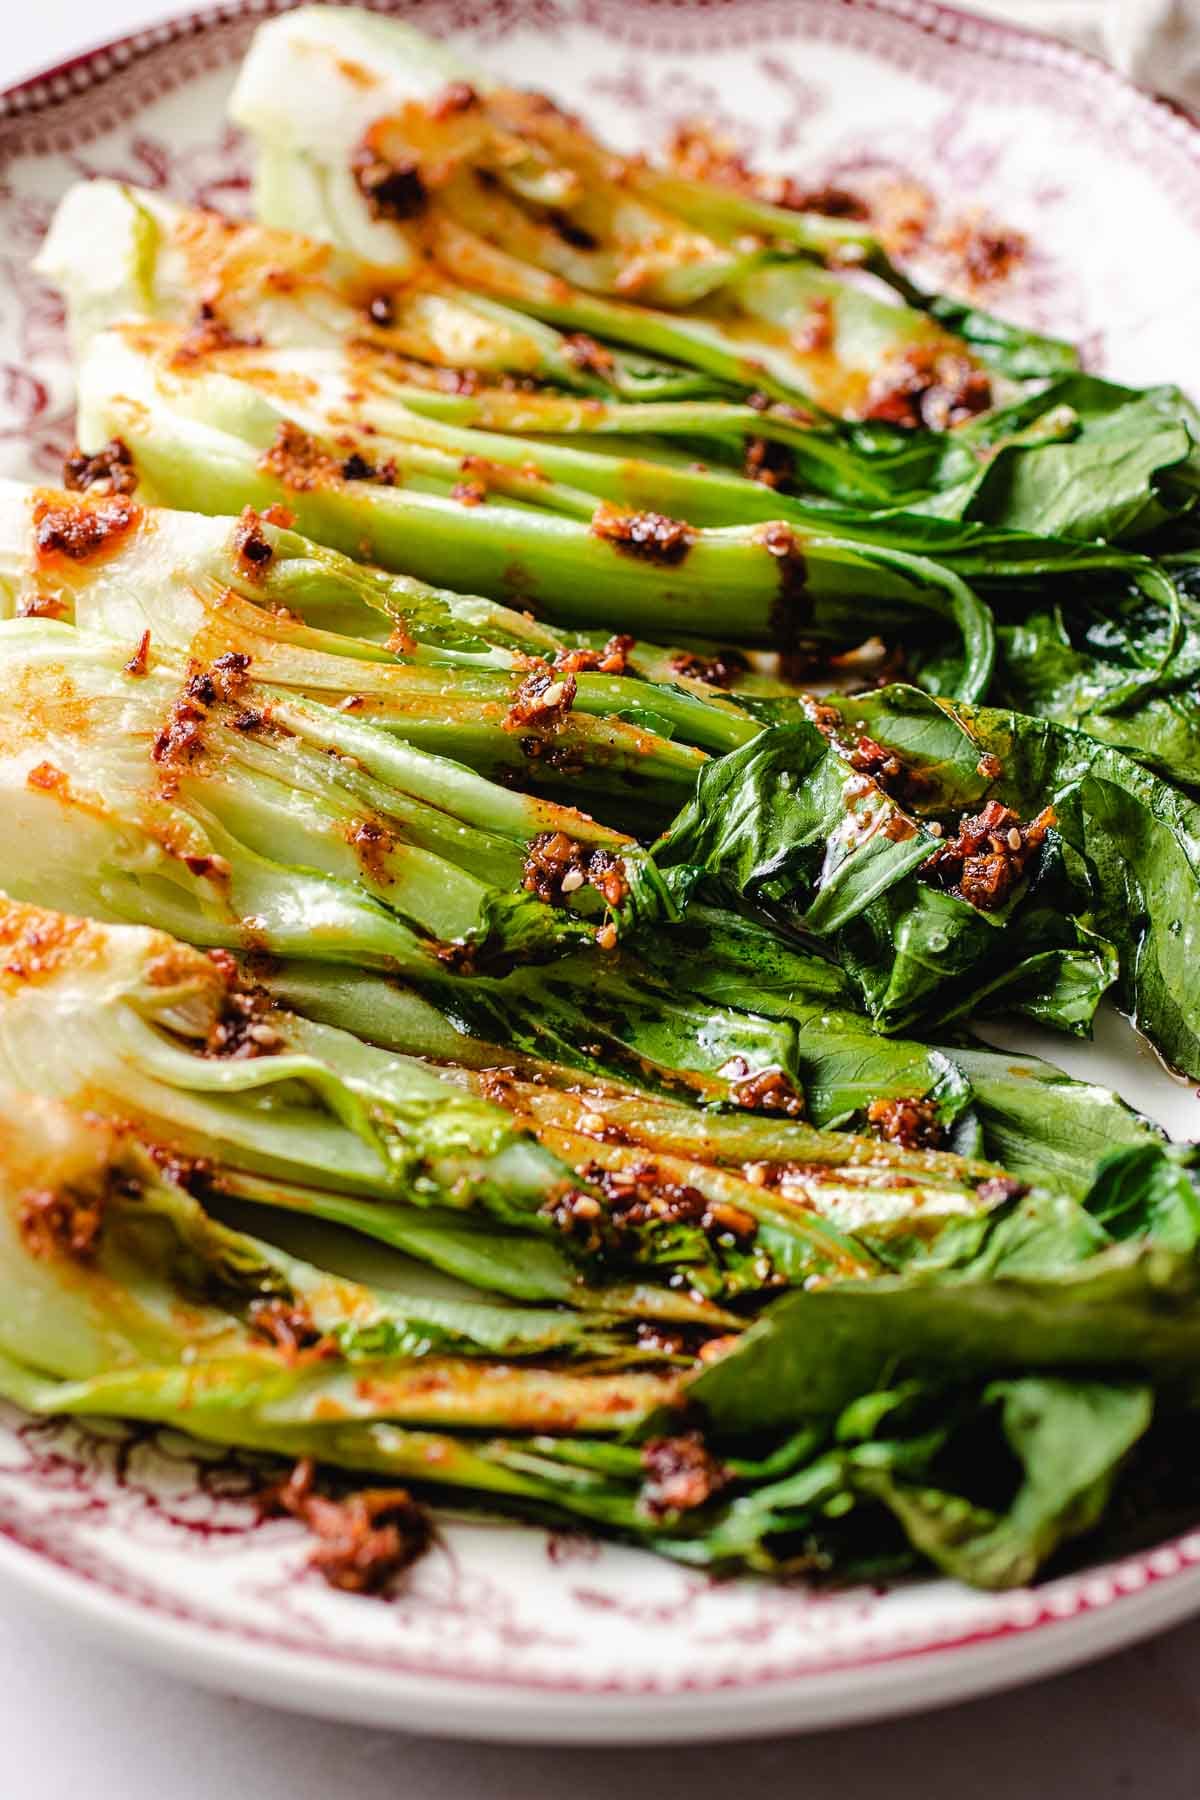 A side close shot shows bok choy roasted and served on a big platter